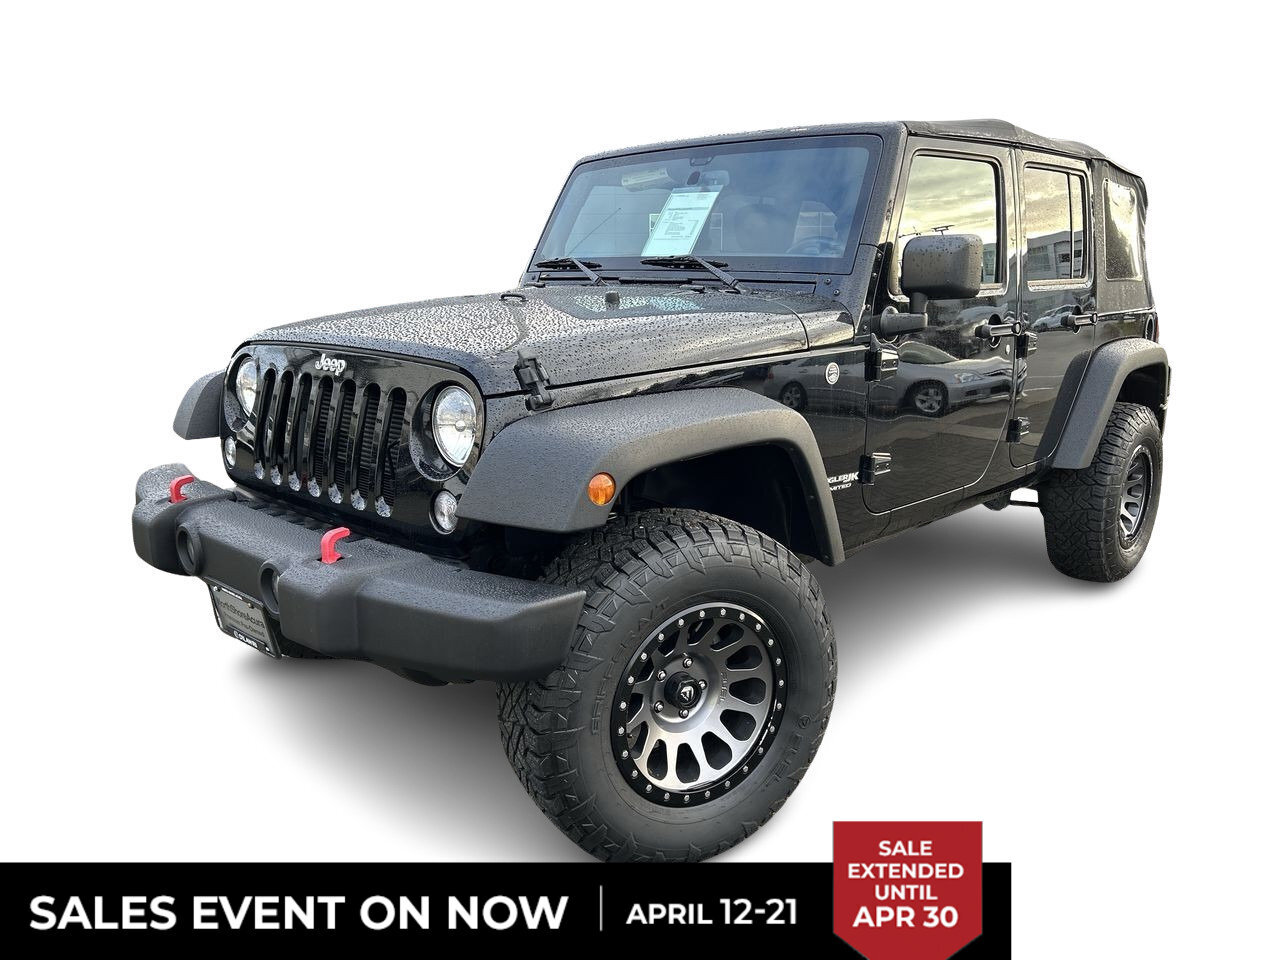 2018 Jeep Wrangler Jk Unlimited Sport ** Low KMs, 33 inch Off Road Wh